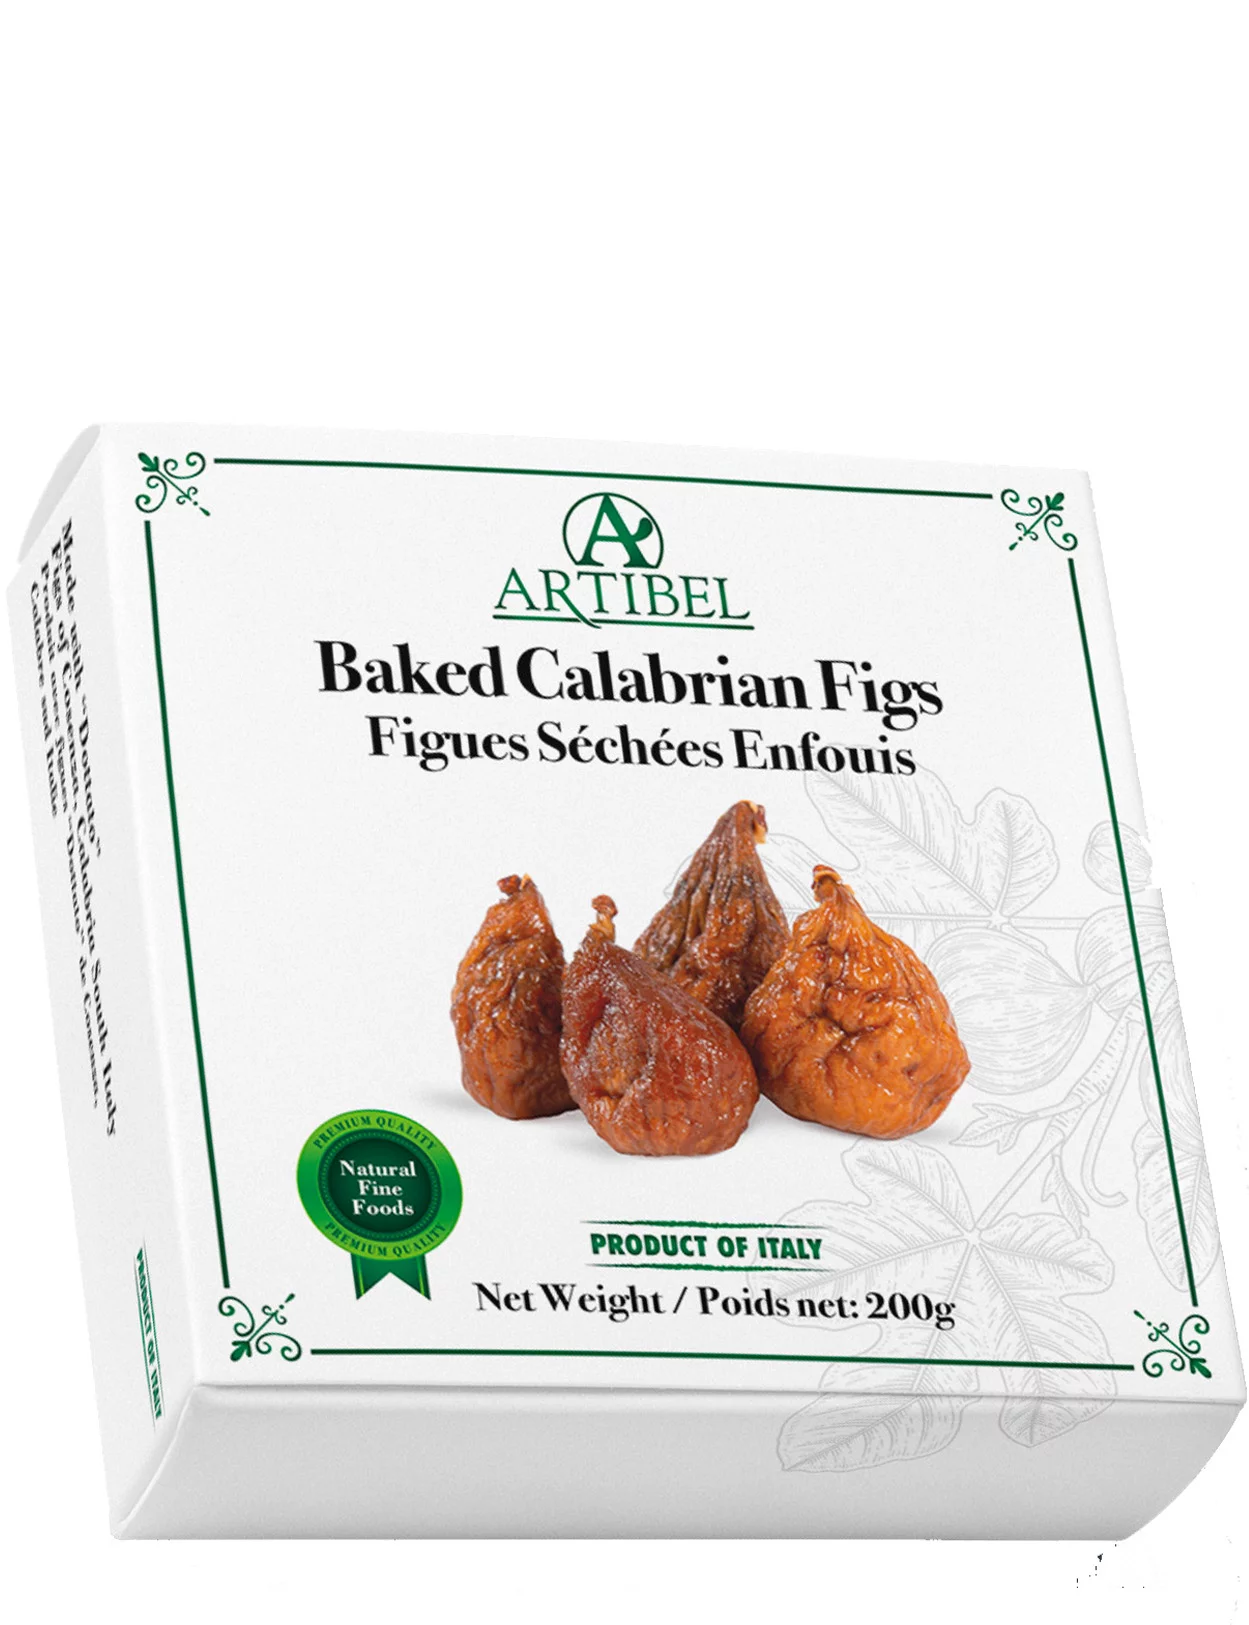 Artibel Oven Baked Calabrian Figs - Torrone Candy